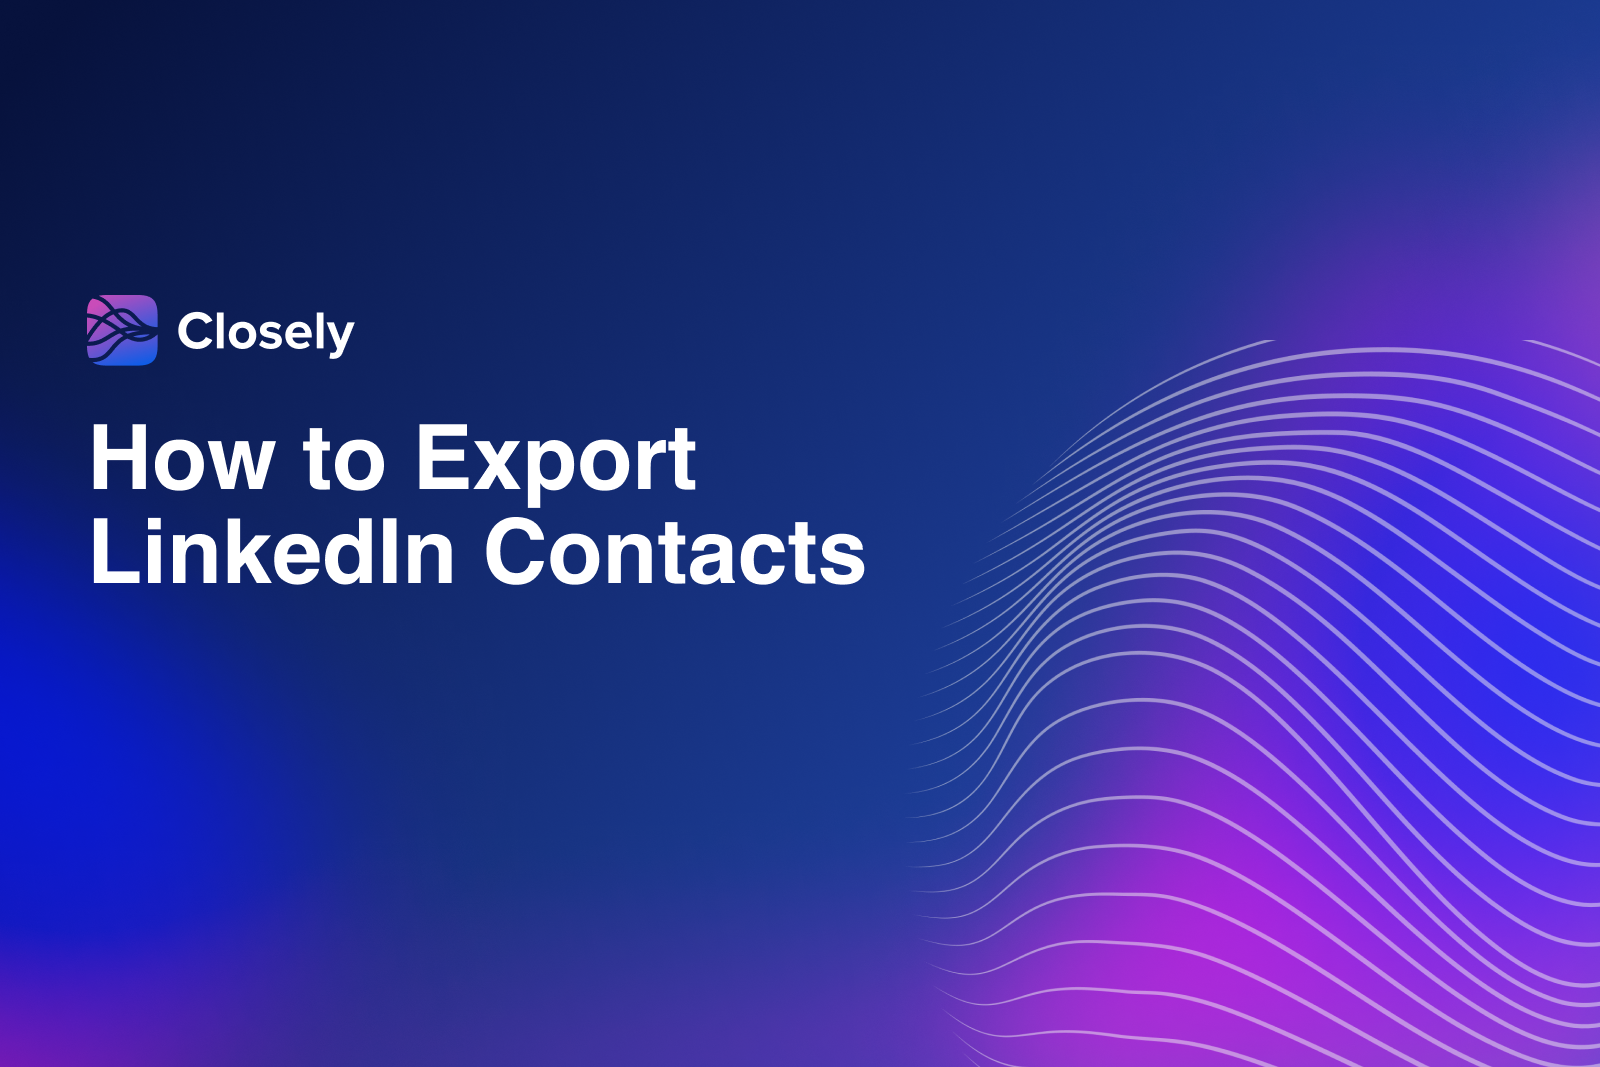 How to export LinkedIn contacts